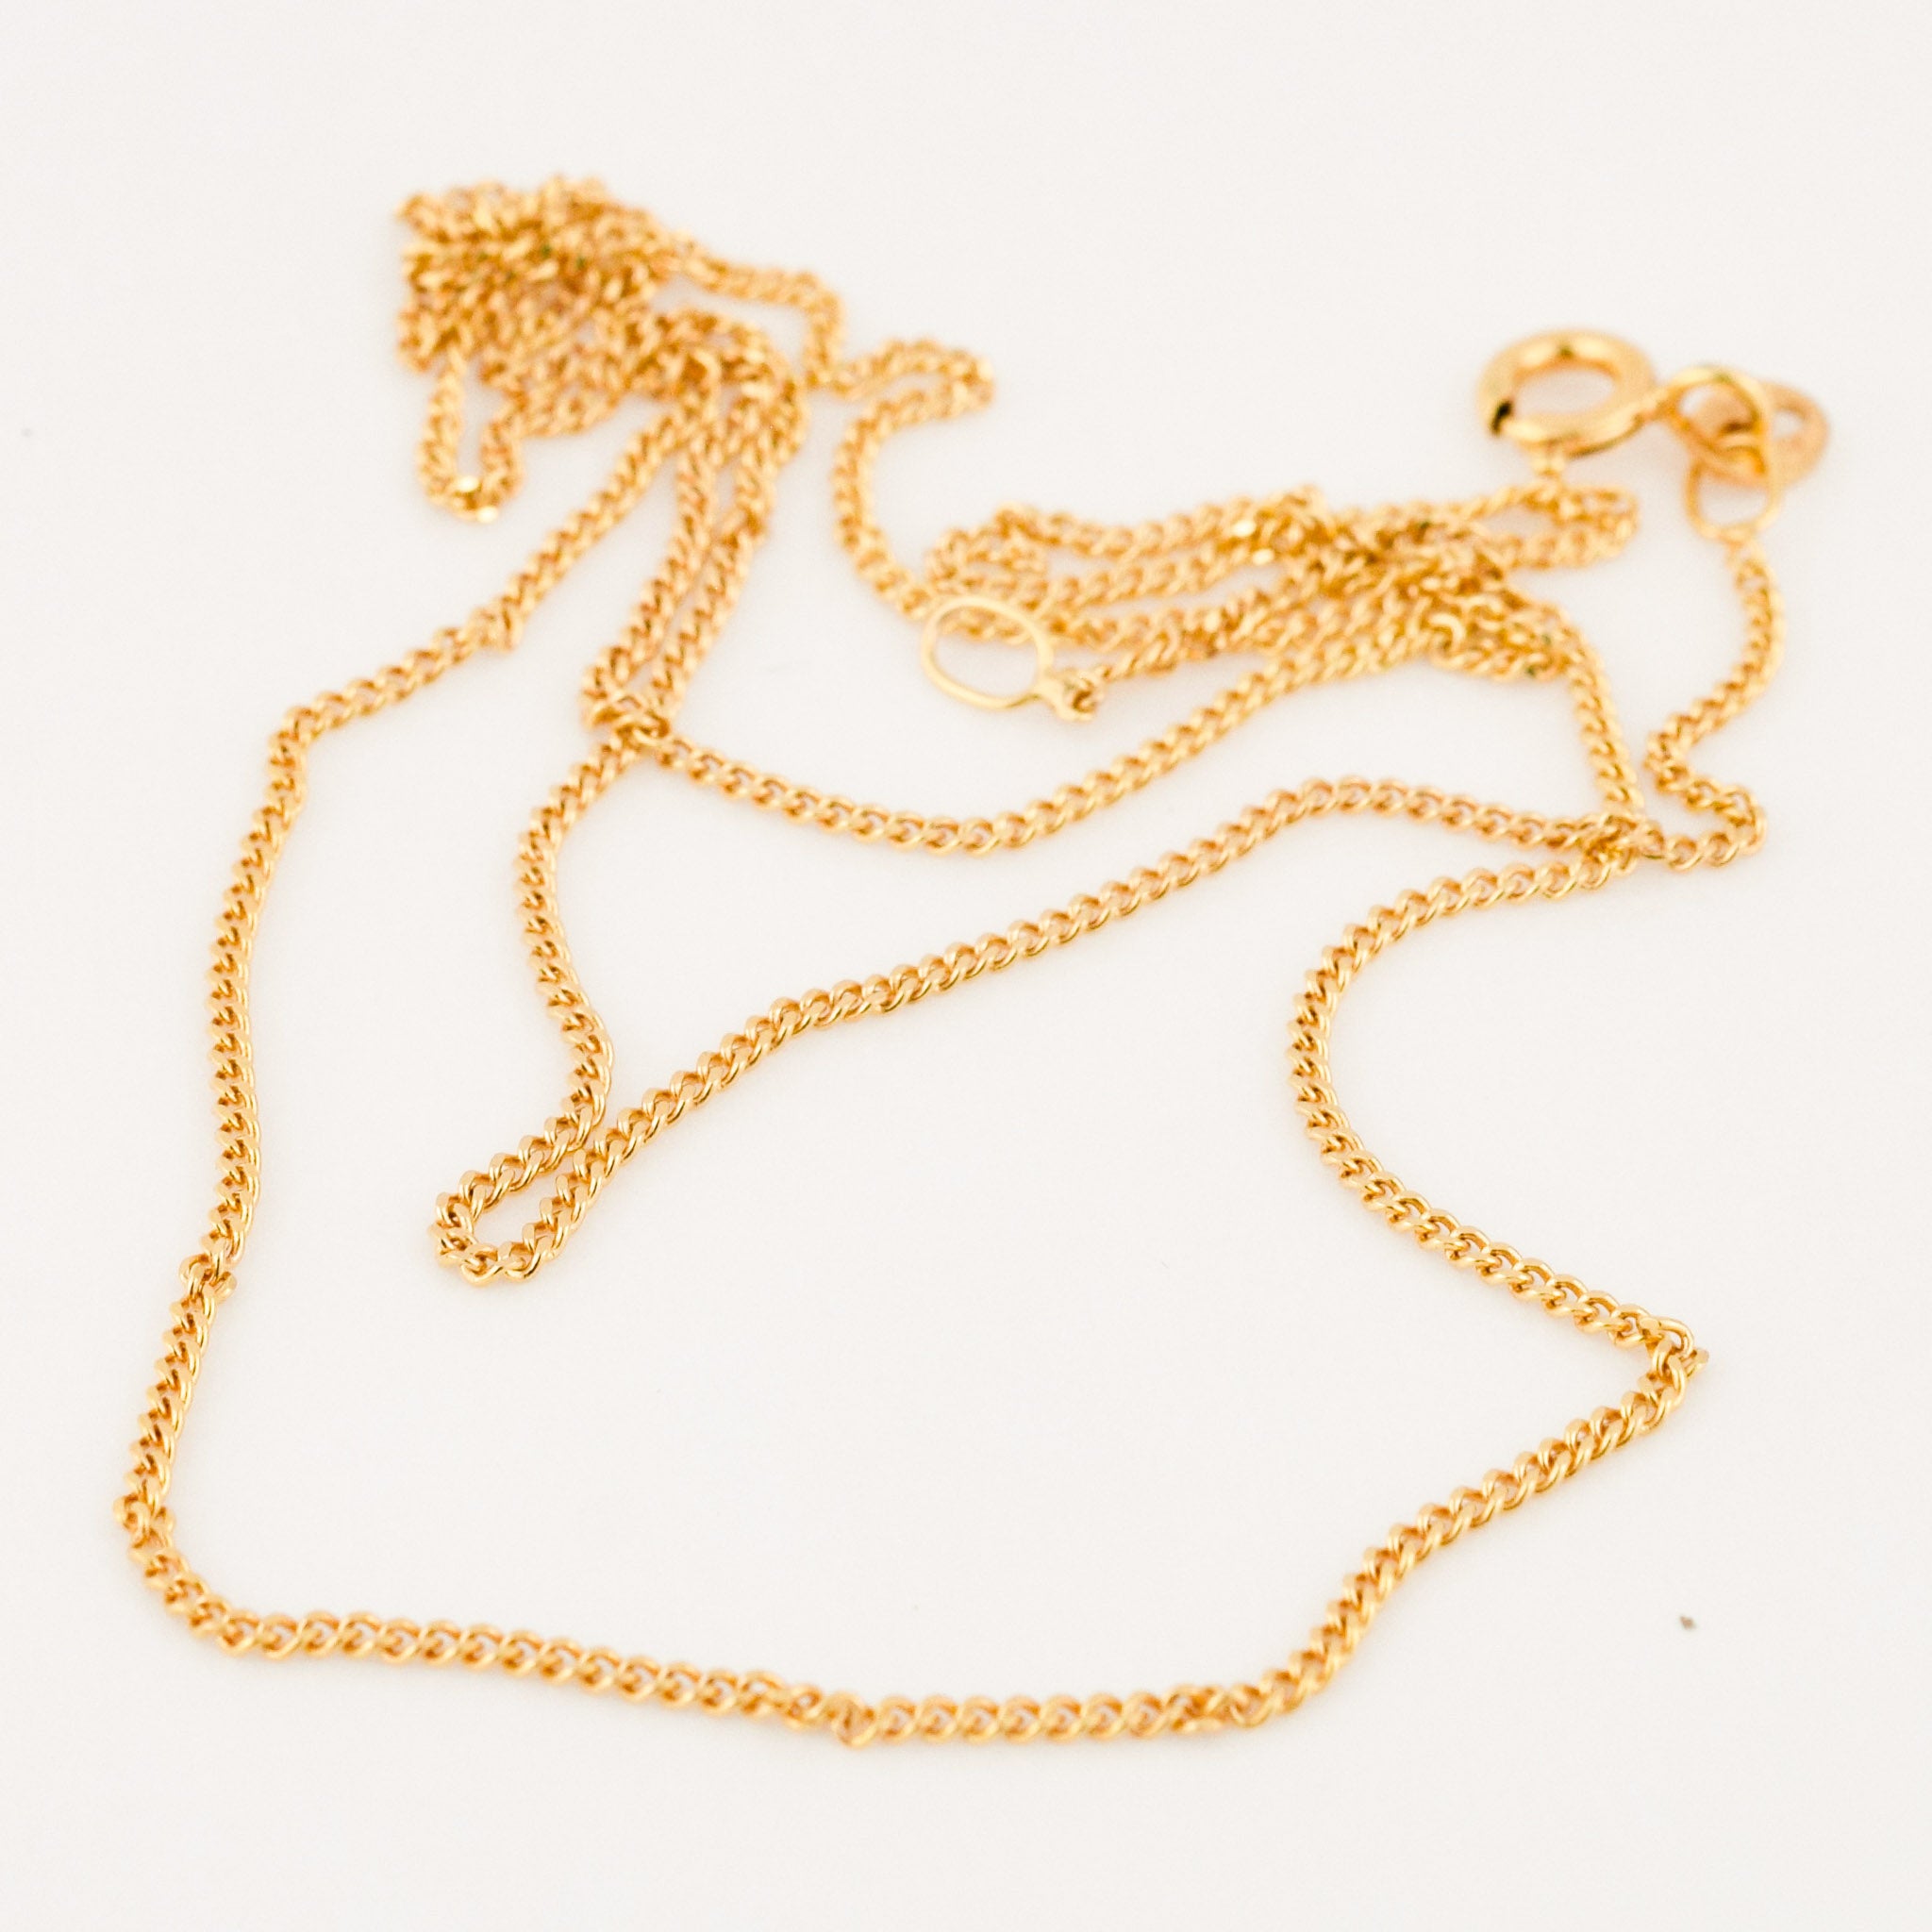 vintage gold 20" curb chain necklace 